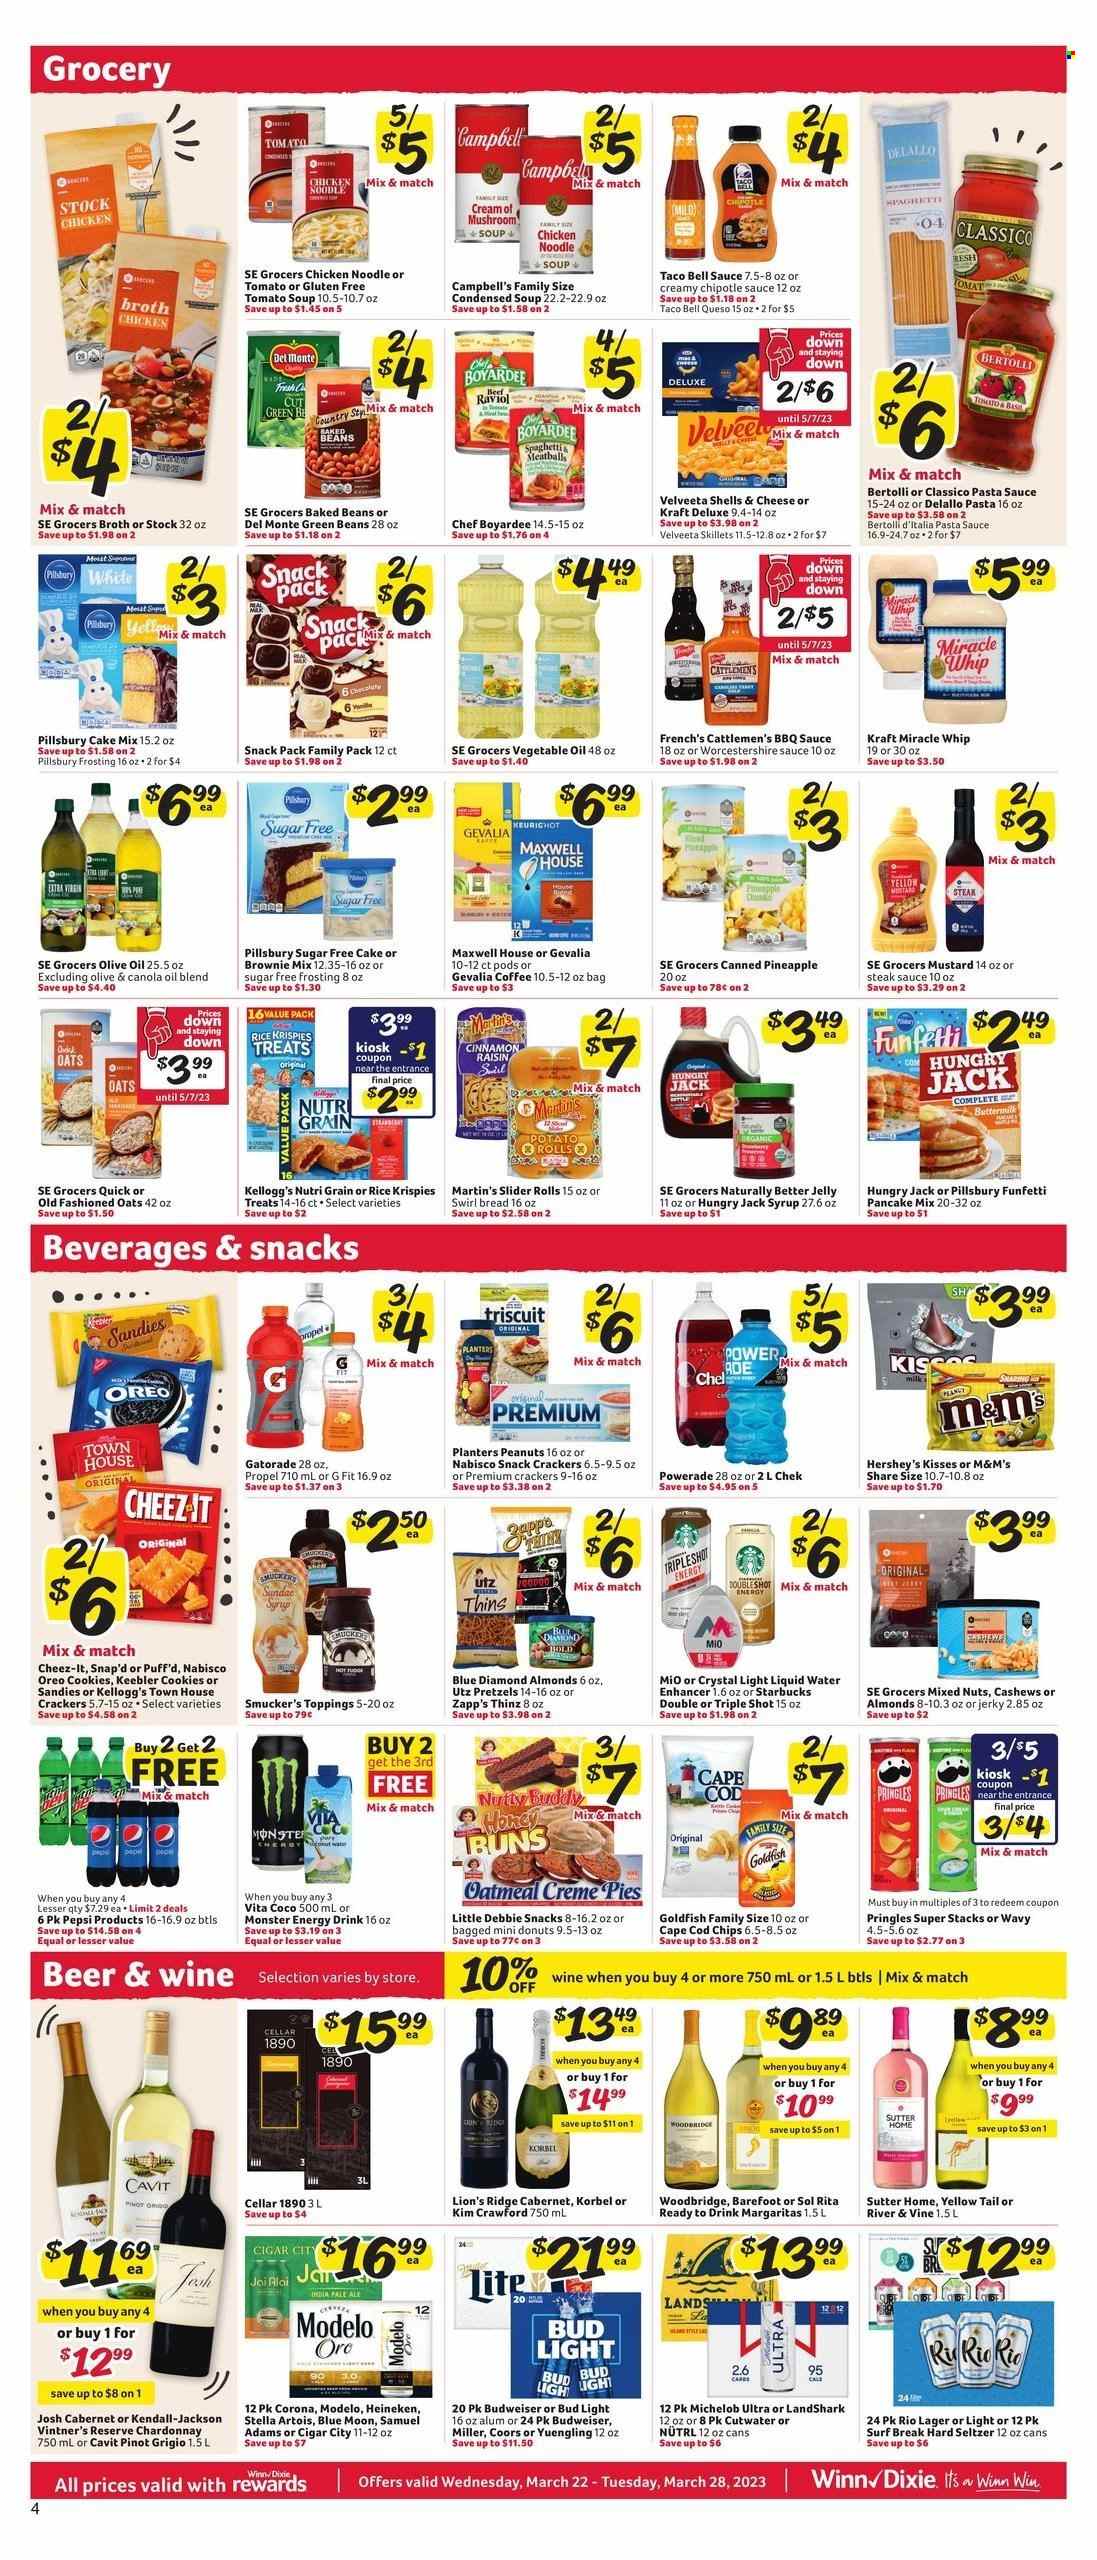 thumbnail - Winn Dixie Flyer - 03/22/2023 - 03/28/2023 - Sales products - bread, pretzels, potato rolls, donut, brownie mix, cake mix, green beans, pineapple, cod, Campbell's, mushroom soup, tomato soup, pasta sauce, condensed soup, soup, pancakes, Pillsbury, noodles cup, noodles, instant soup, Kraft®, Bertolli, jerky, Oreo, buttermilk, Miracle Whip, Hershey's, cookies, jelly, M&M's, crackers, Kellogg's, Keebler, Pringles, chips, Thins, Goldfish, Cheez-It, frosting, oatmeal, broth, baked beans, Chef Boyardee, Del Monte, Rice Krispies, Nutri-Grain, BBQ sauce, mustard, steak sauce, worcestershire sauce, Classico, canola oil, extra virgin olive oil, vegetable oil, olive oil, oil, honey, syrup, almonds, cashews, peanuts, mixed nuts, Planters, Blue Diamond, Powerade, Pepsi, energy drink, Monster, Monster Energy, Gatorade, water, Maxwell House, Starbucks, Gevalia, Cabernet Sauvignon, white wine, Chardonnay, wine, Pinot Grigio, Woodbridge, Hard Seltzer, beer, Stella Artois, Bud Light, Corona Extra, Heineken, Miller, Lager, Modelo, steak, Surf, Budweiser, Coors, Blue Moon, Yuengling, Michelob. Page 5.